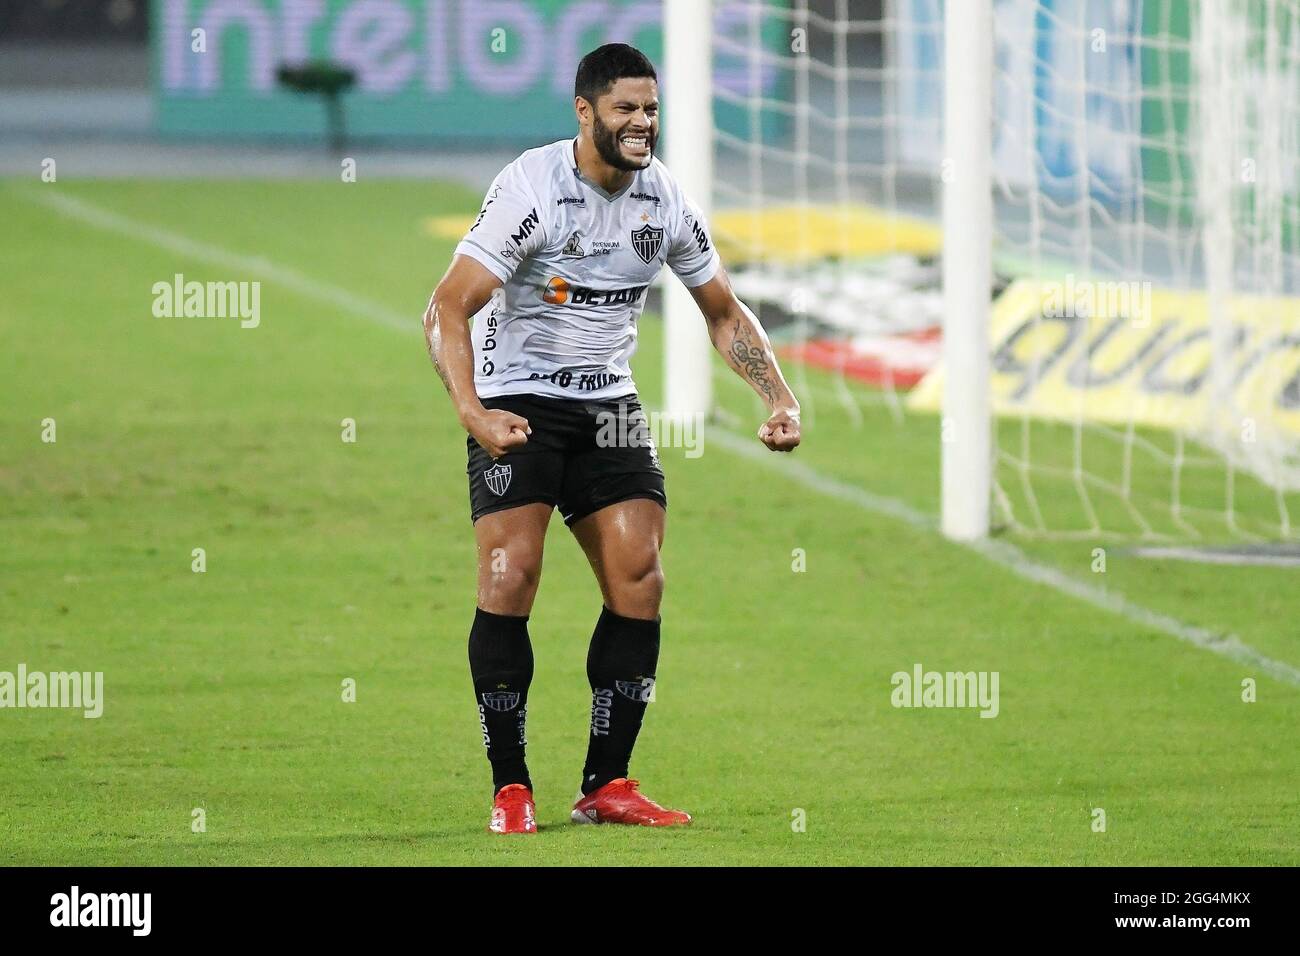 Rio de Janeiro, Brazil, August 26, 2021. Hulk football player from Atlético-MG team celebrates his goal during the game against Fluminense for the Bra Stock Photo